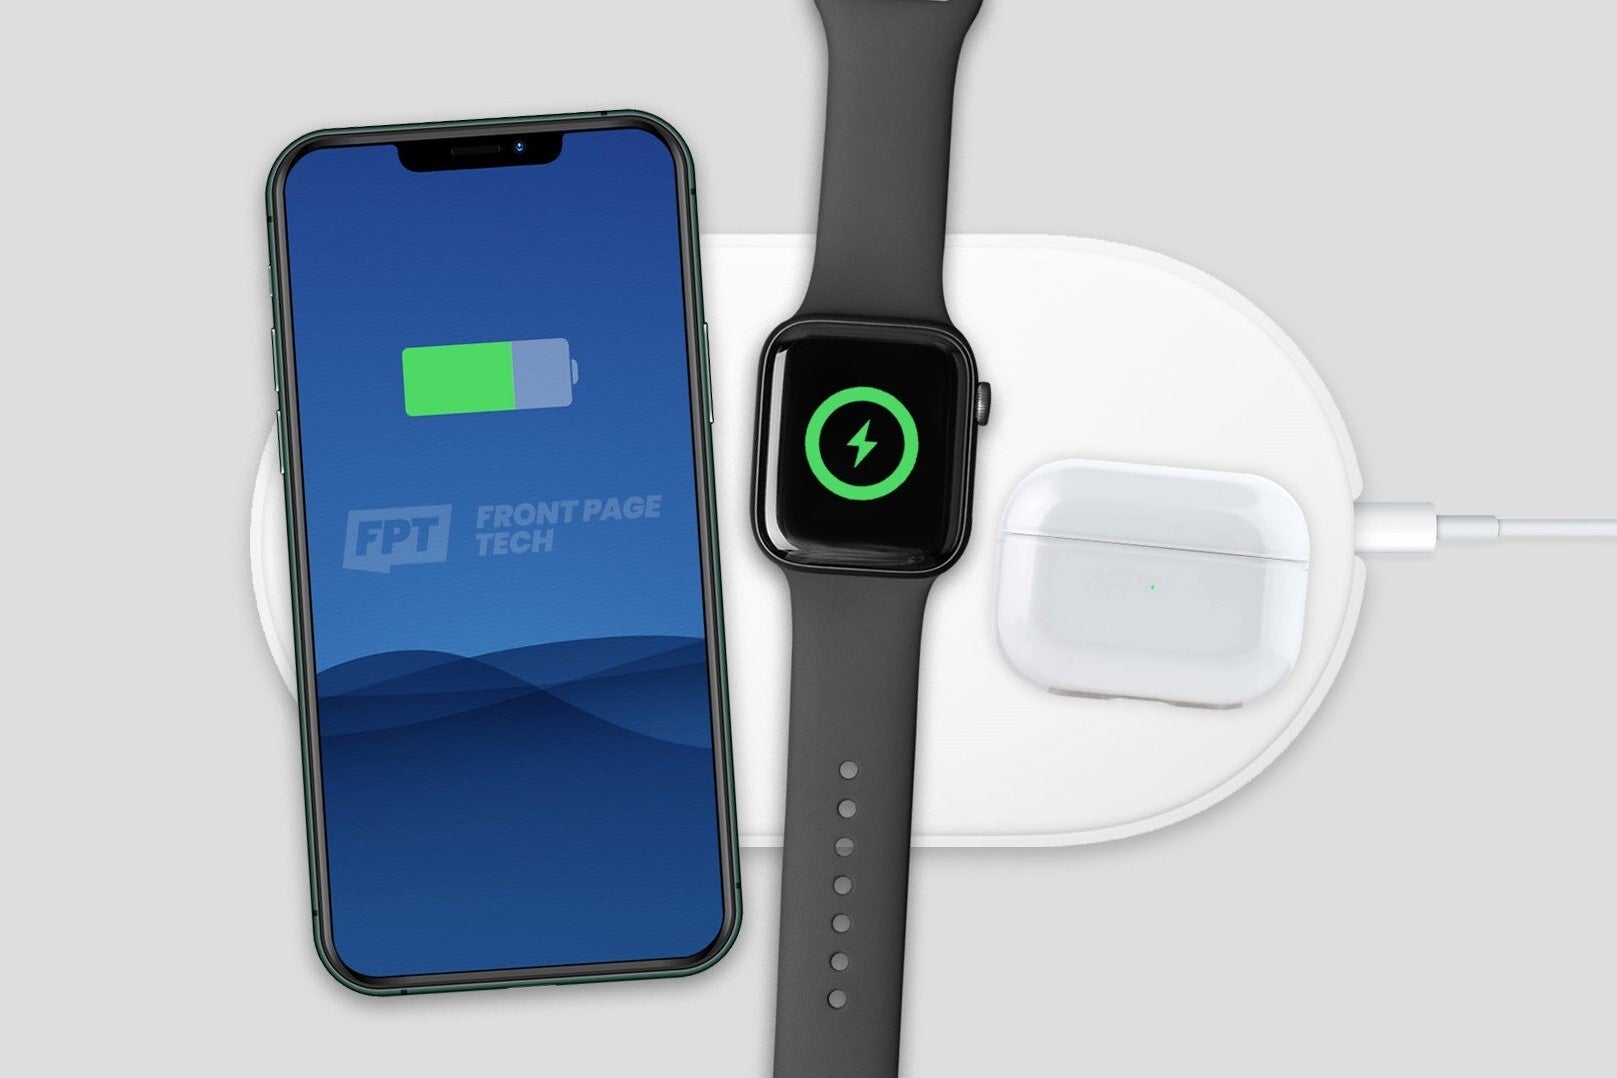 New AirPower concept render - Apple may launch cheaper AirPods, game controller, two HomePods, and more soon